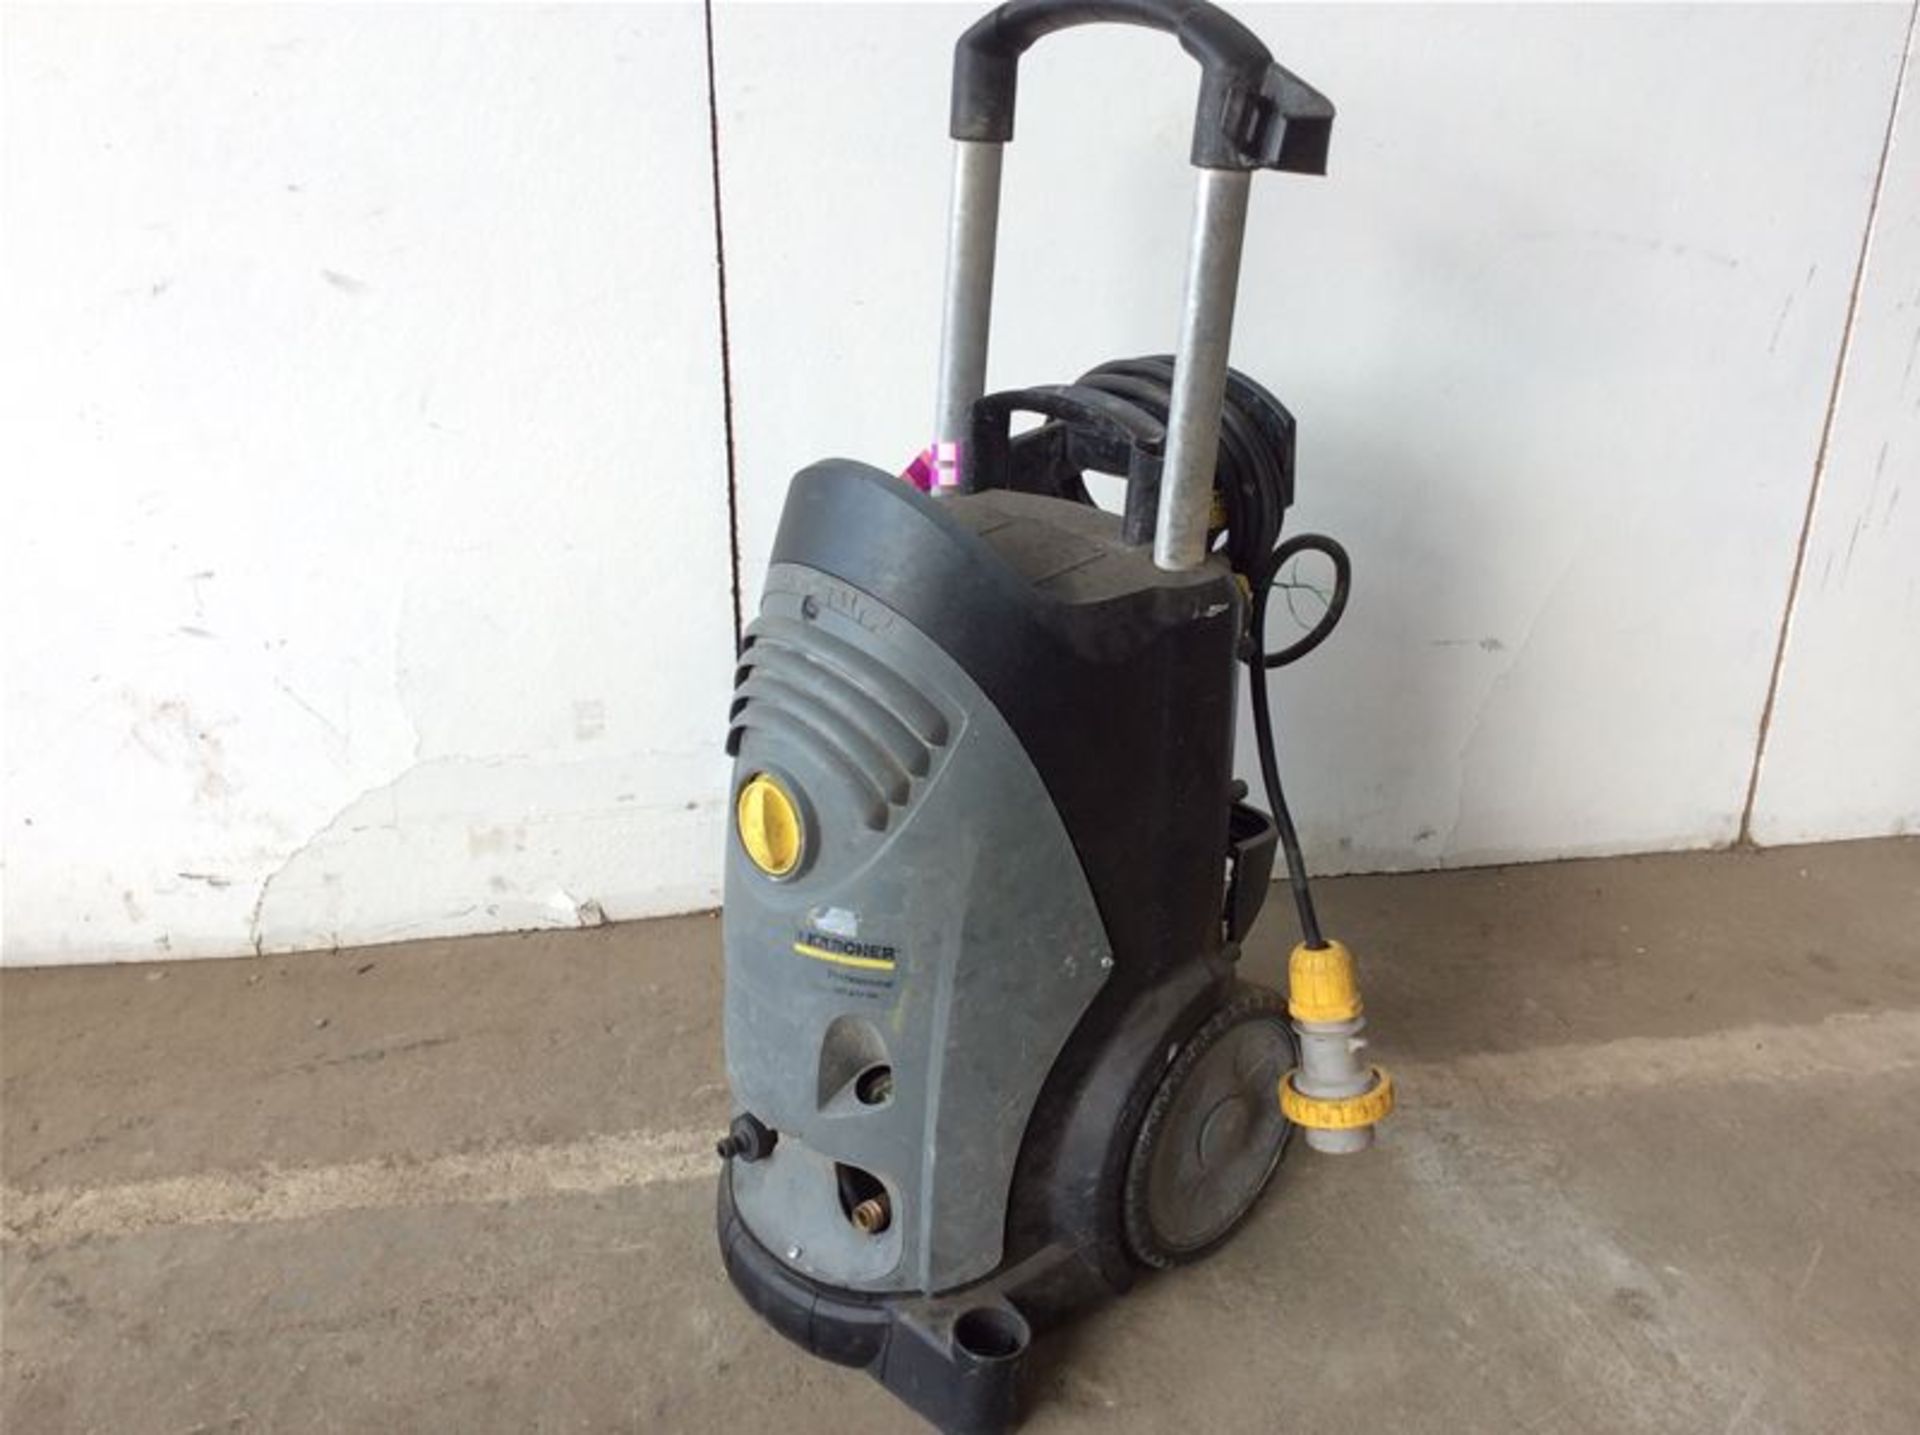 KARCHER HD 6/11-4M COMPACT POWER WASHER